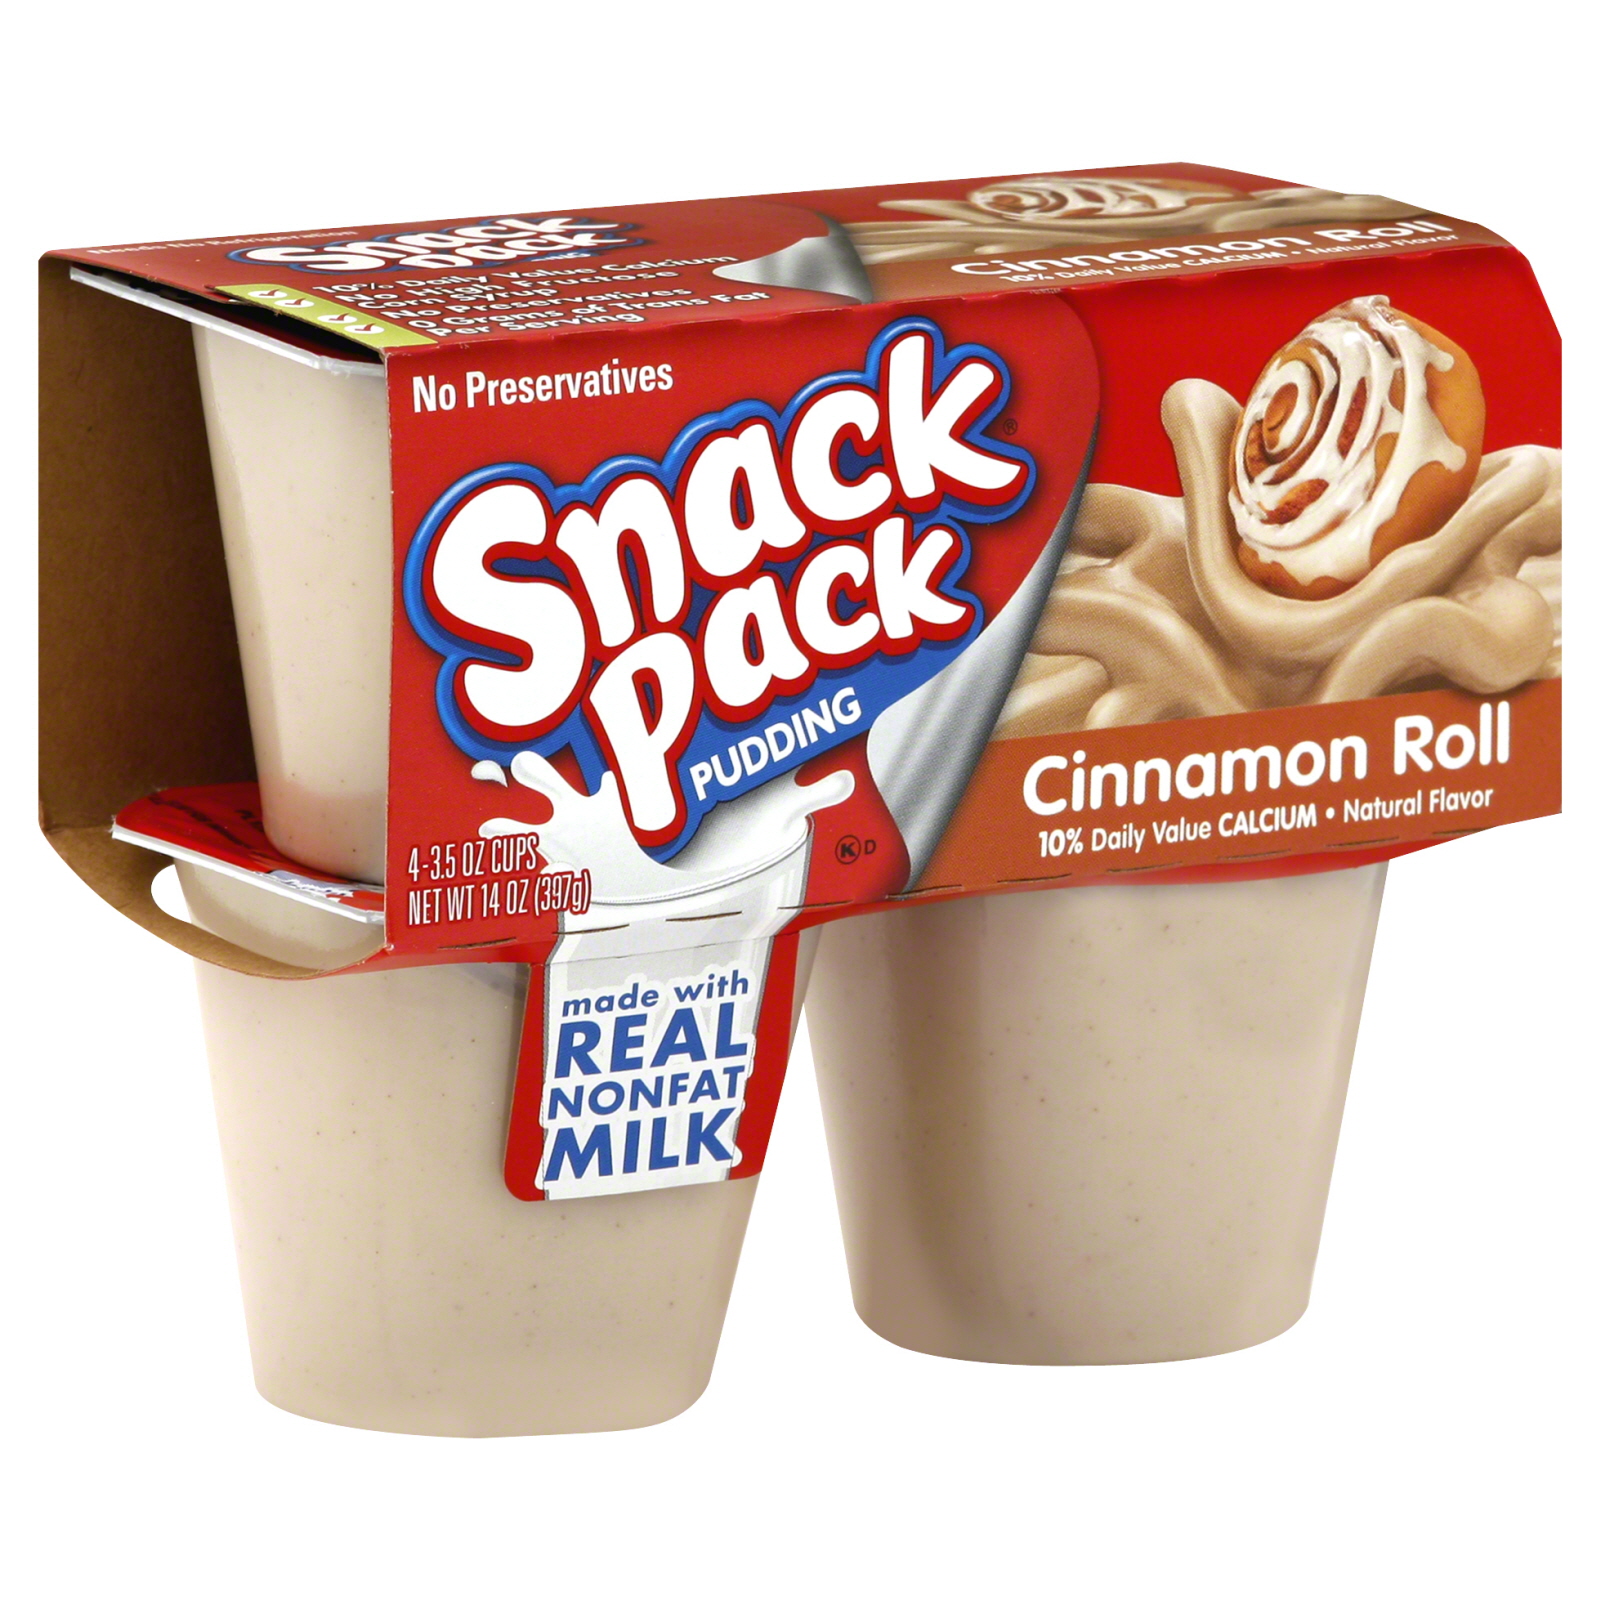 Snack Pack Pudding, Cinnamon Roll 4 - 3.5 oz cups (14 oz) 397 g